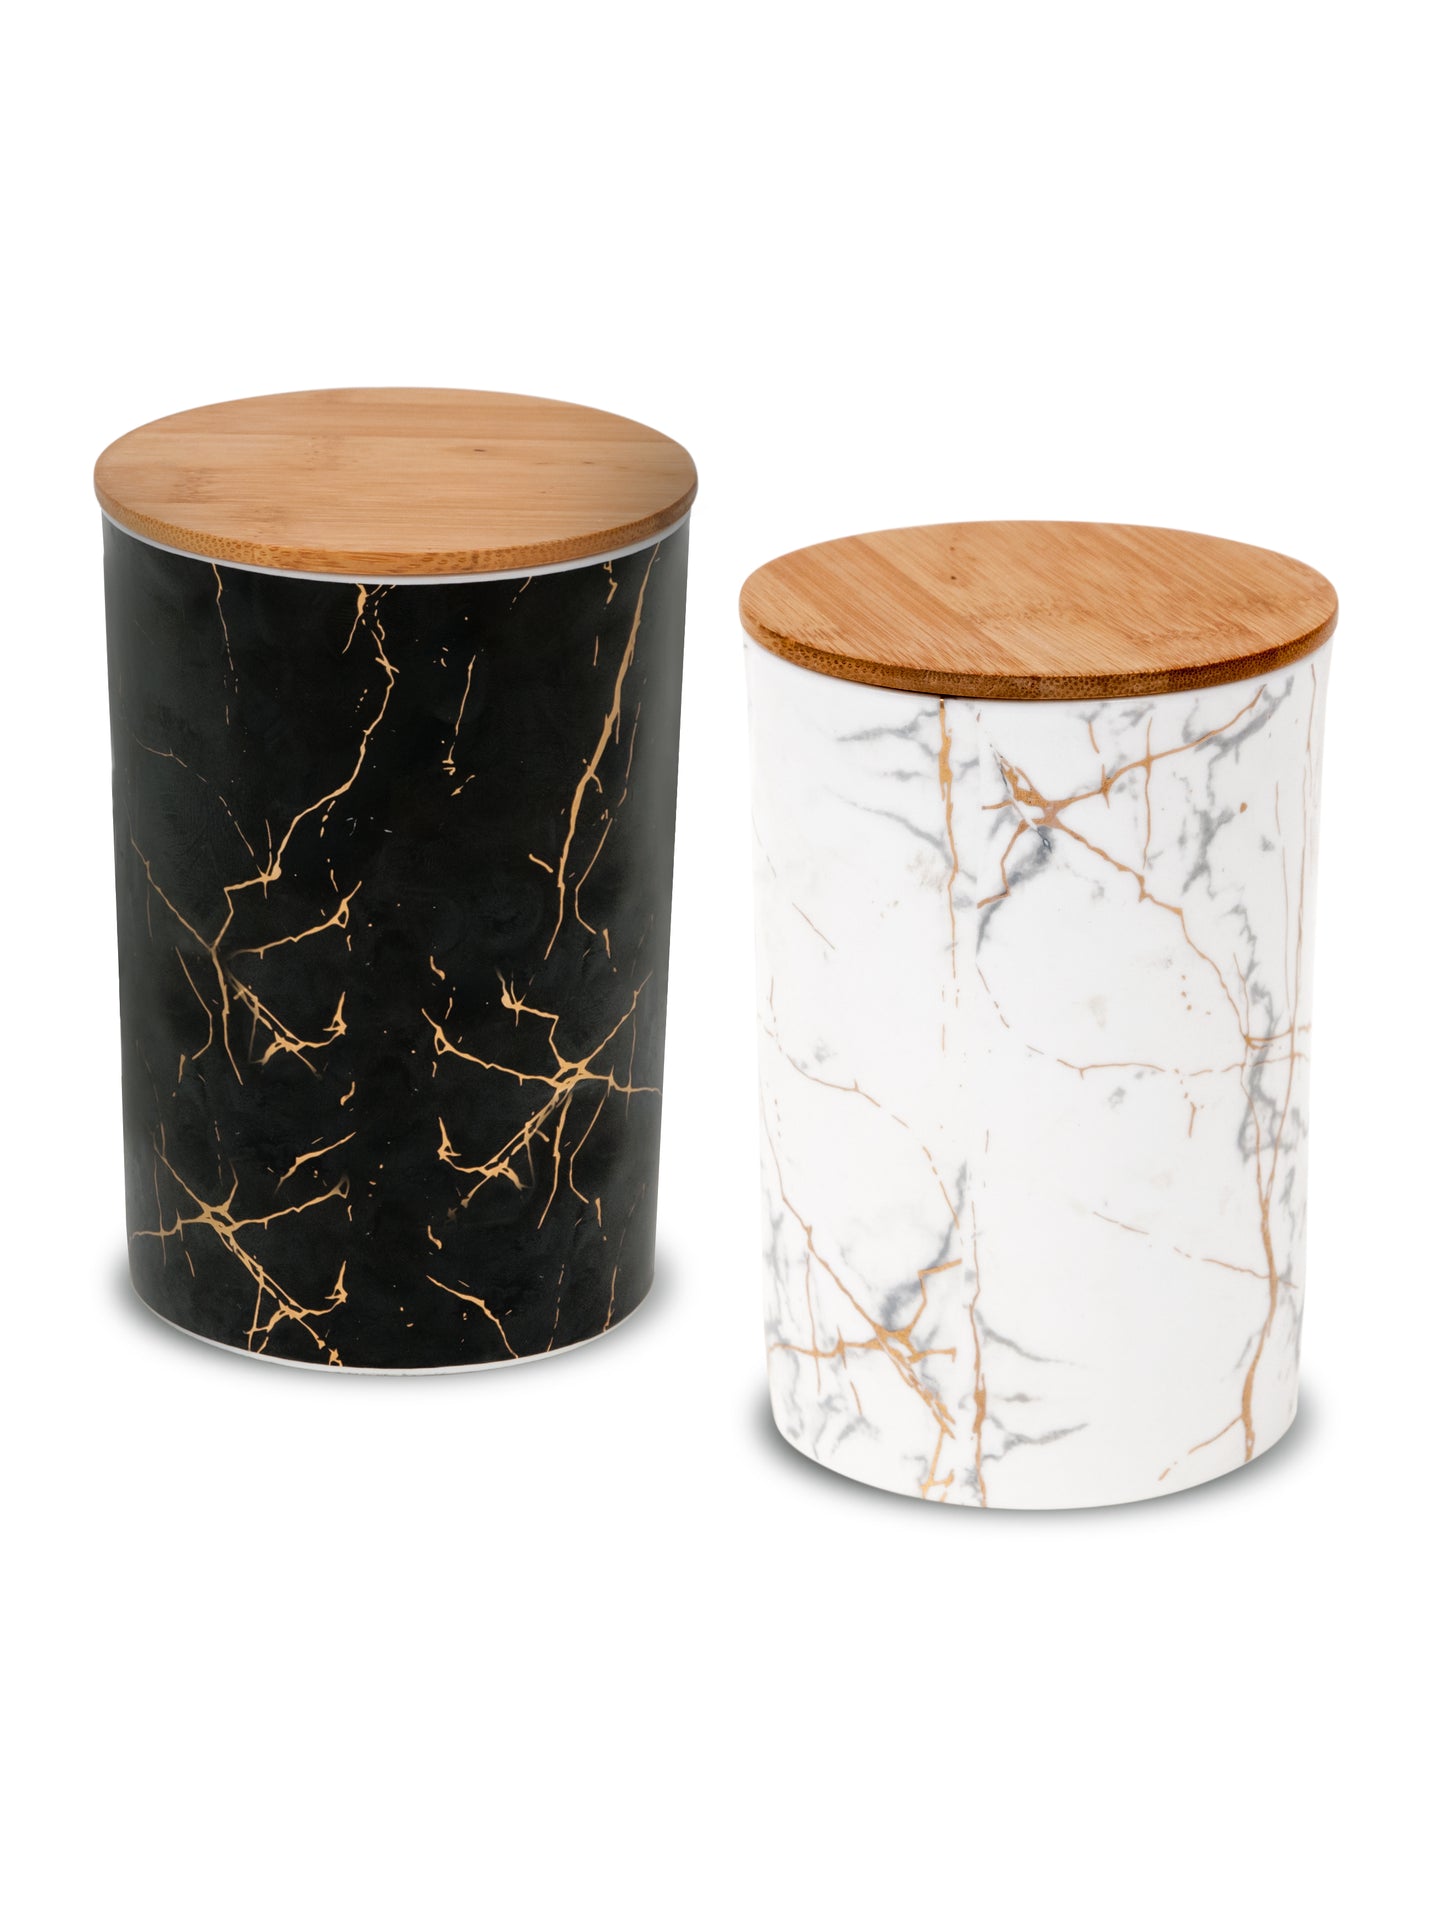 Ceramic Big Containers Set with Lids for Storage, Marble Gold Monochrome, 2 pieces